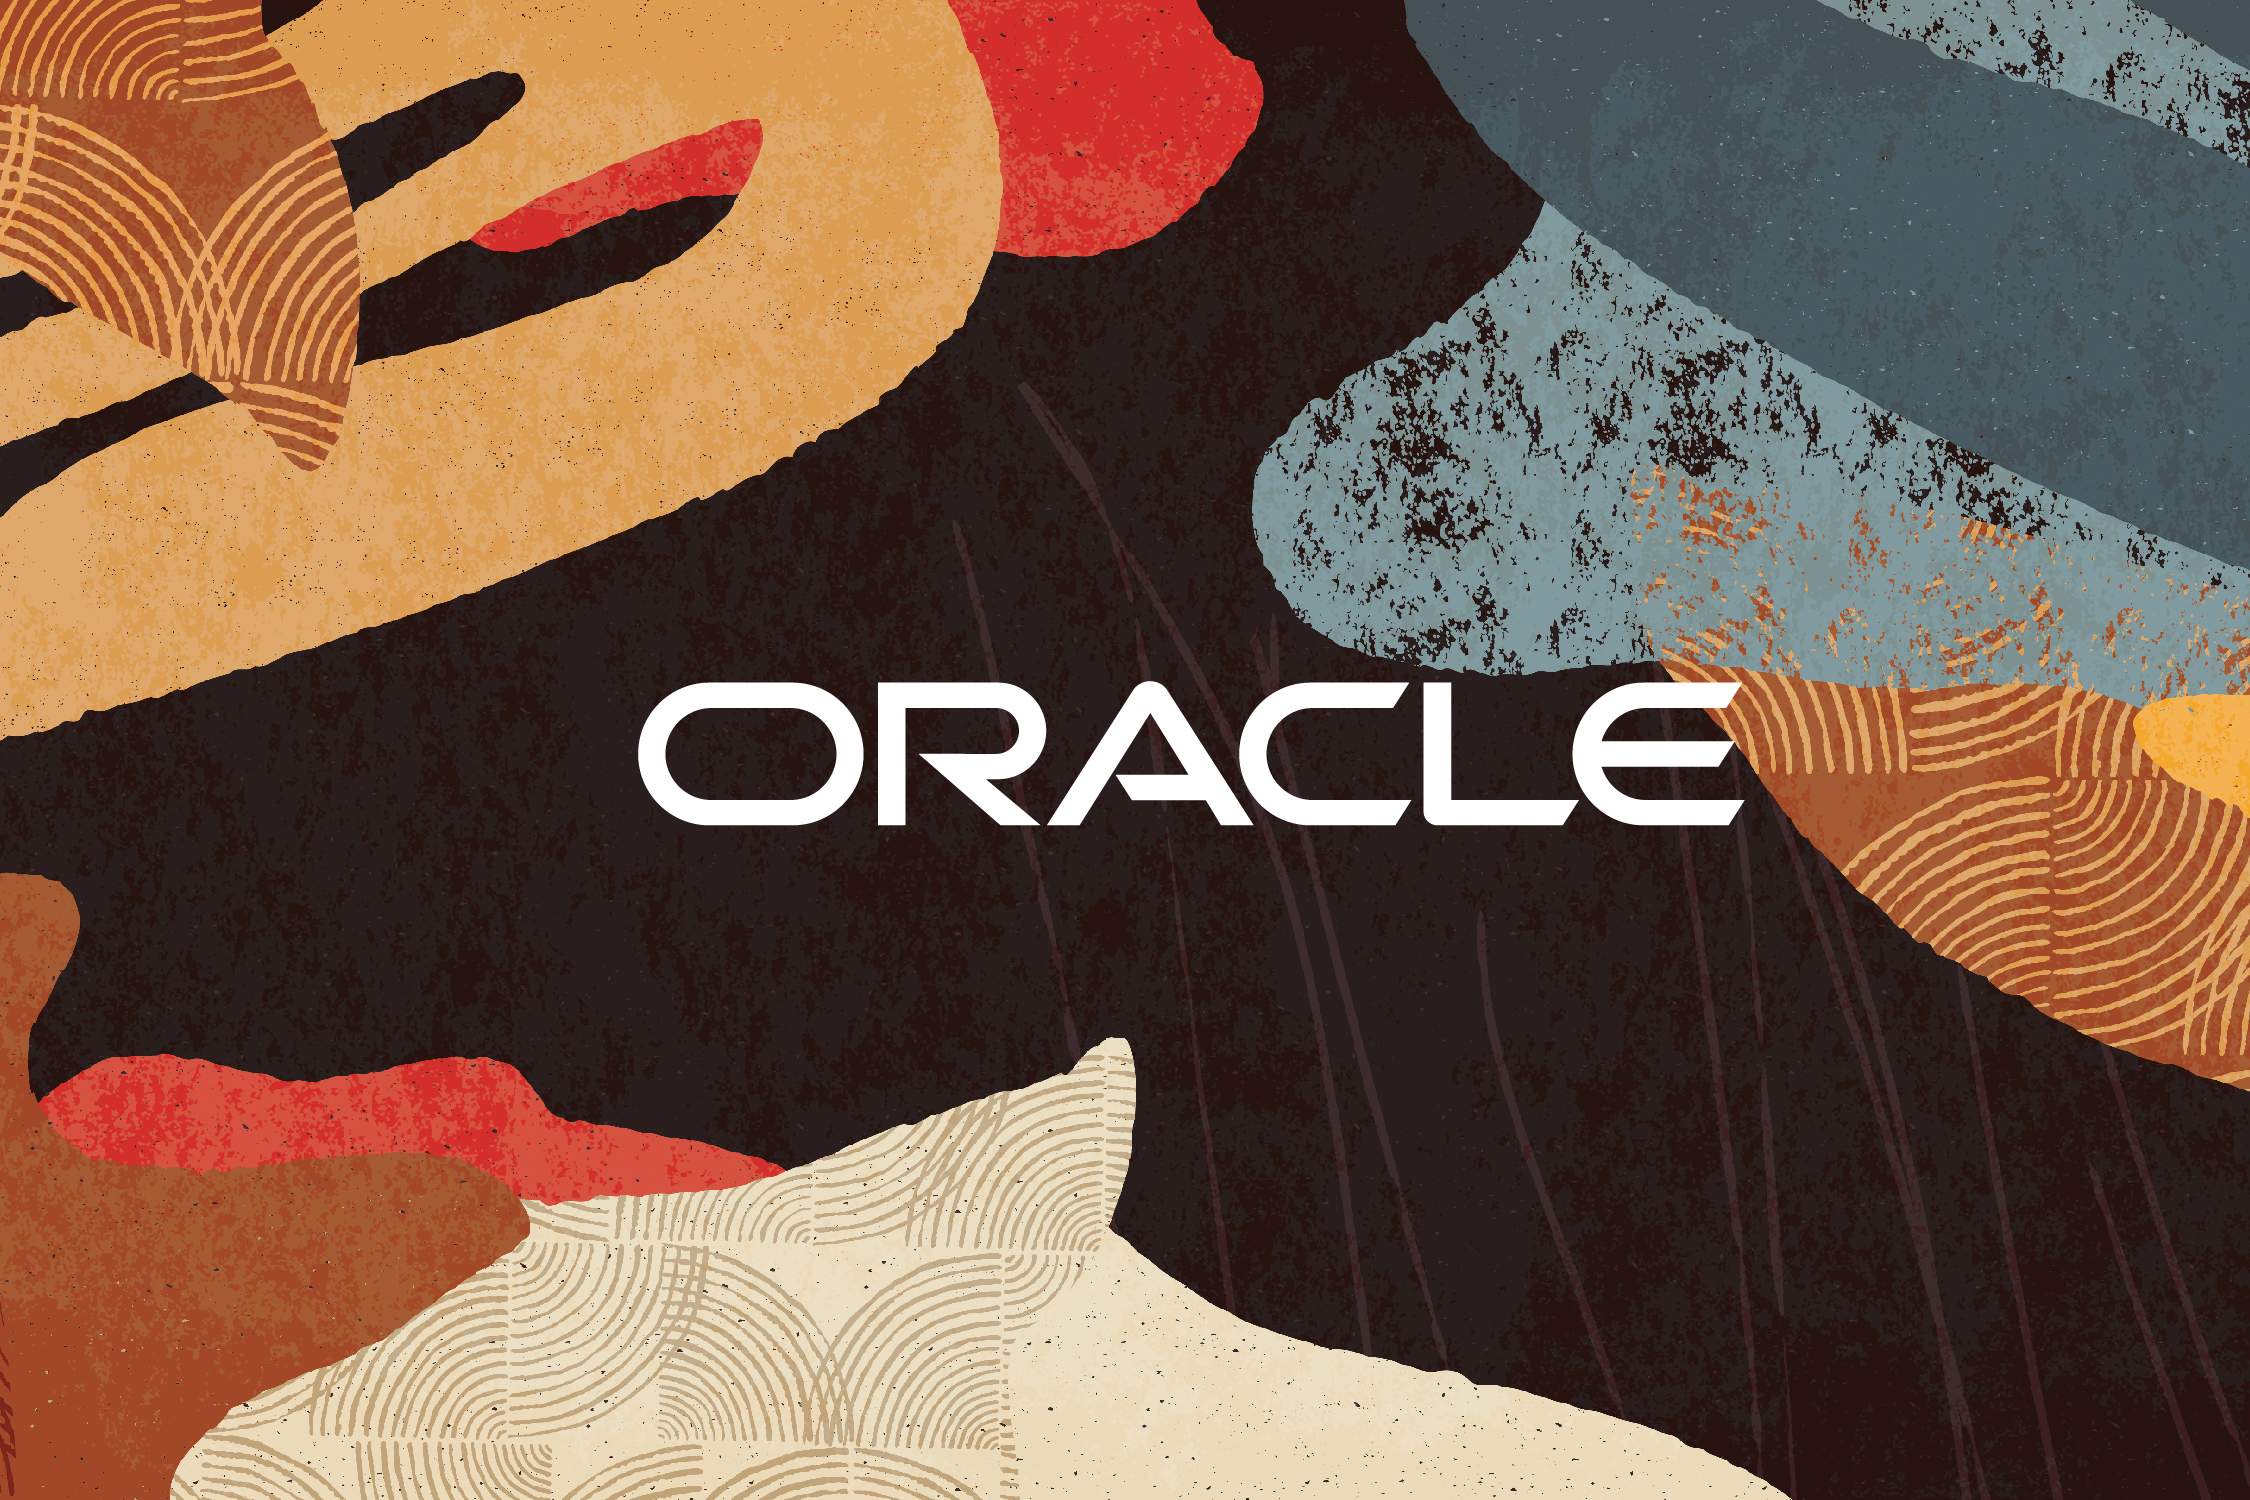 Oracle Product & Services logos